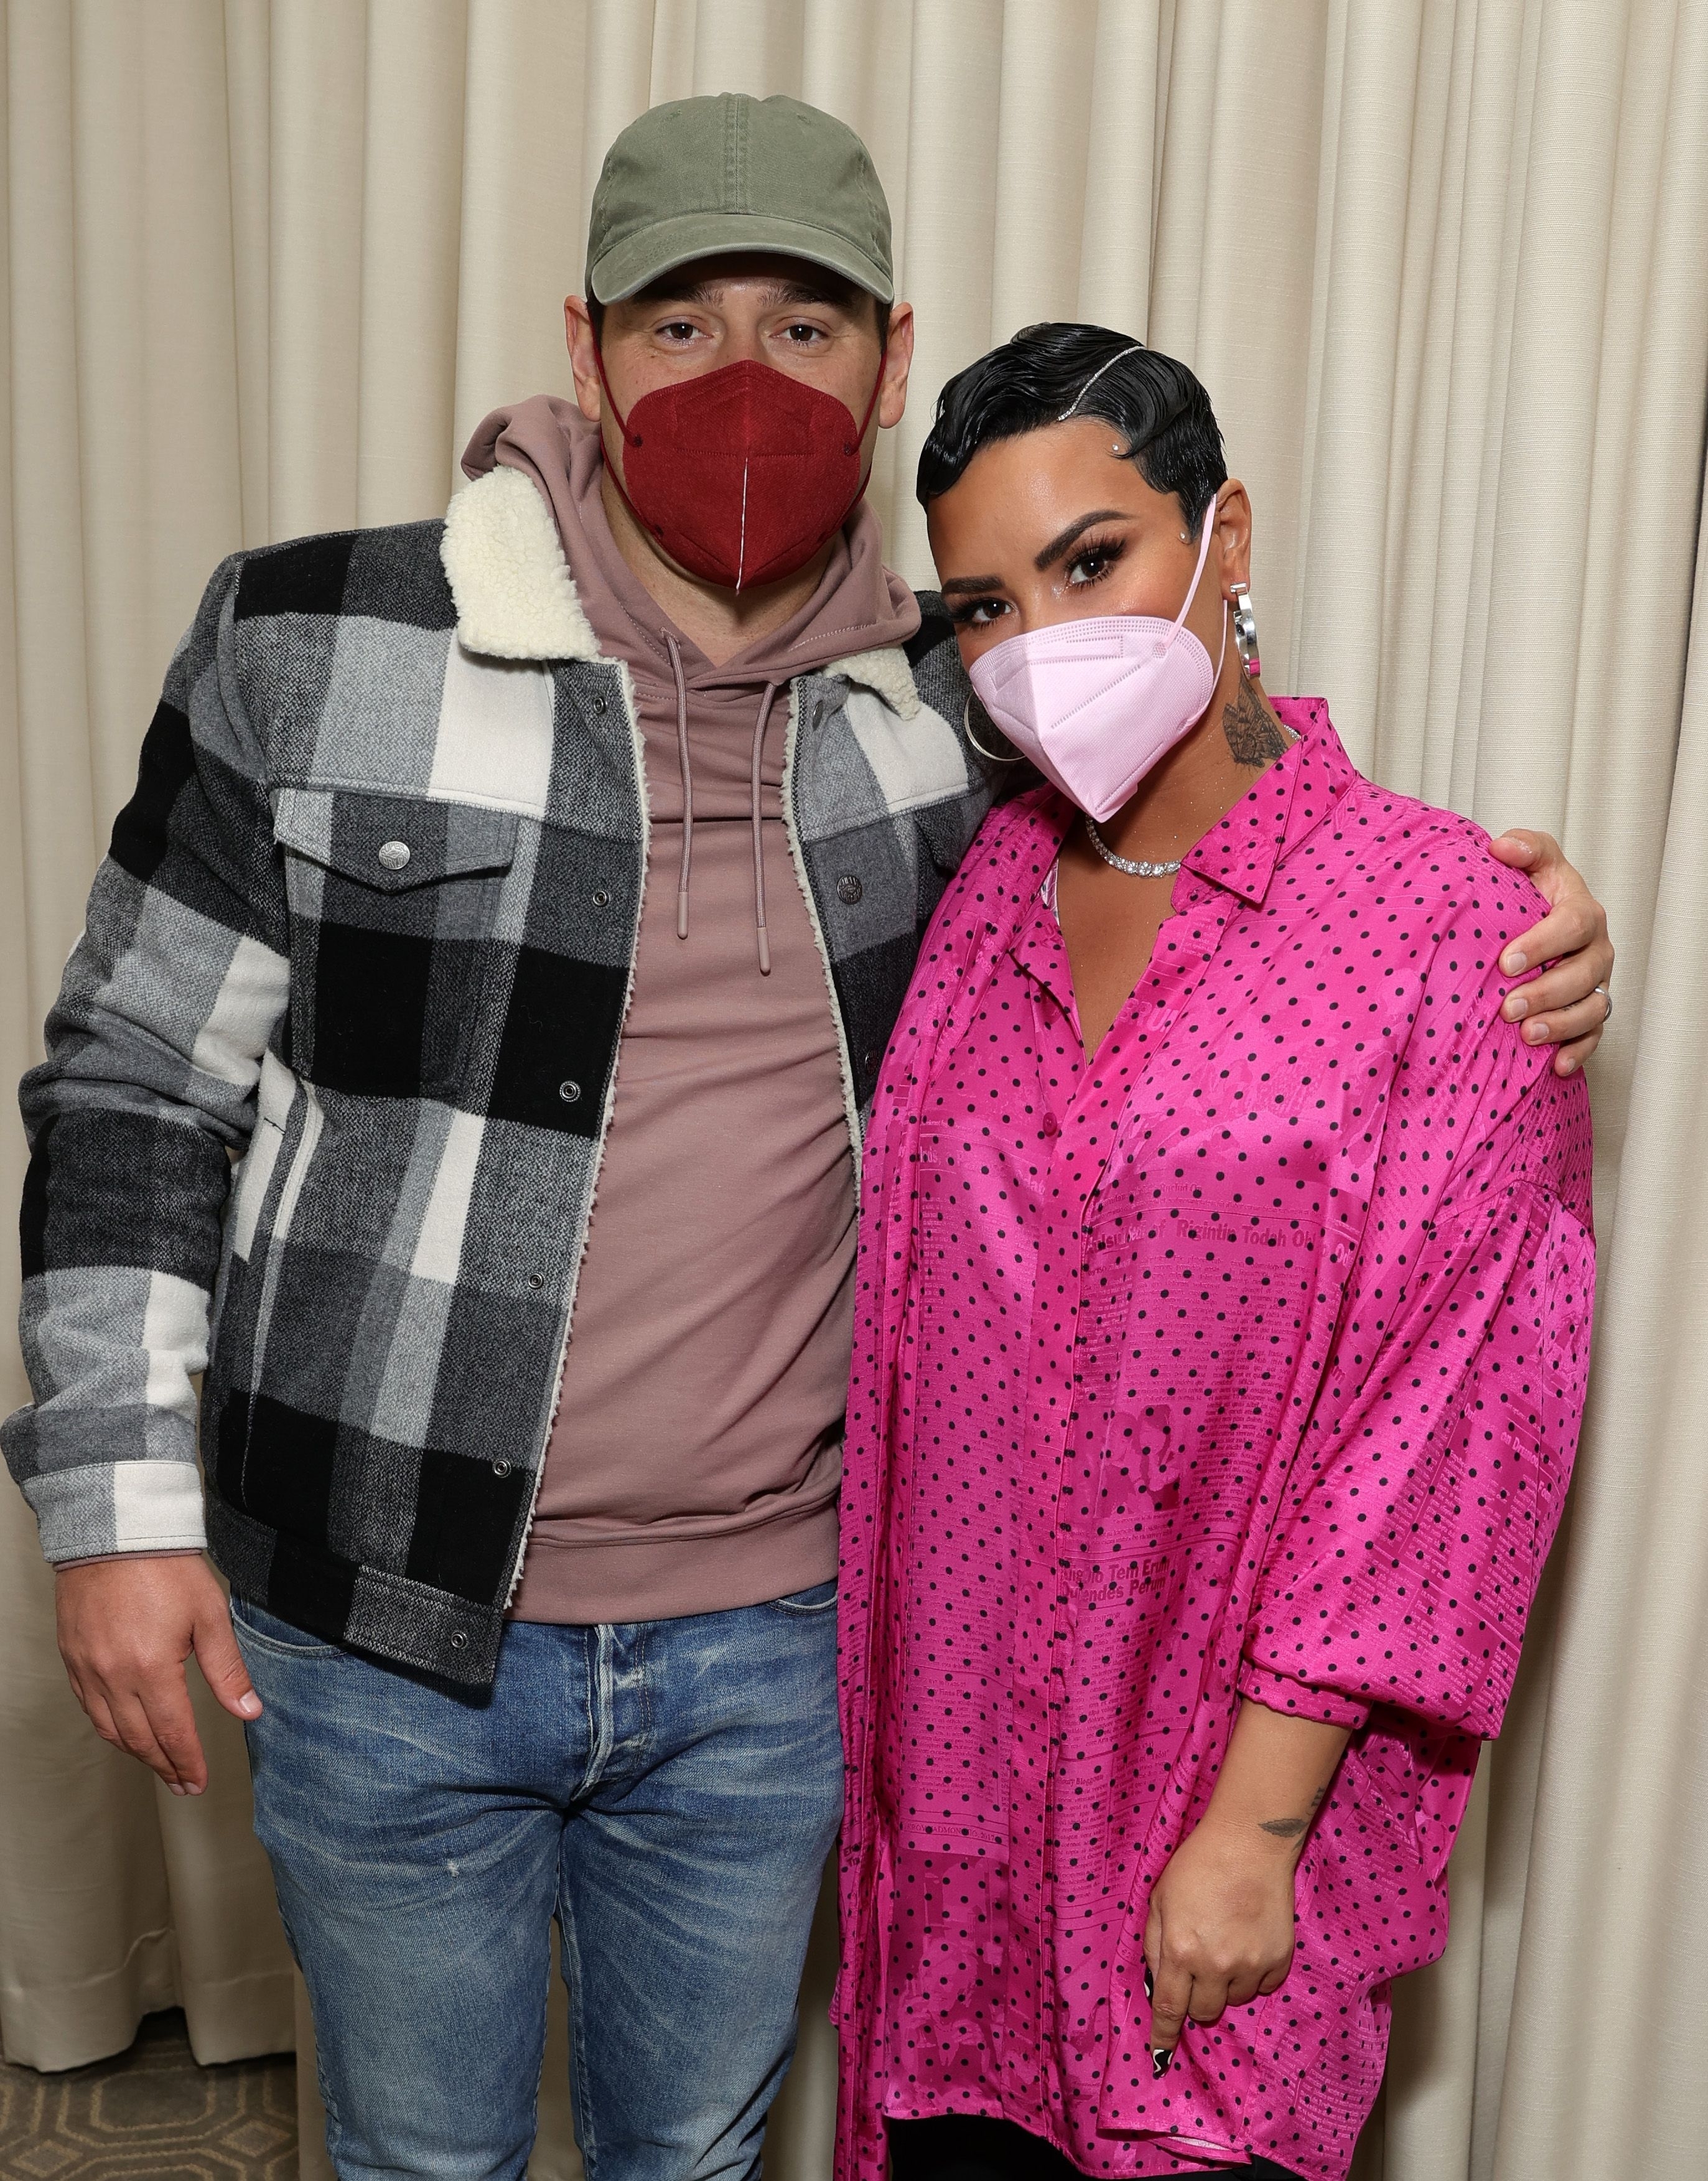 Scooter and Demi both in face masks